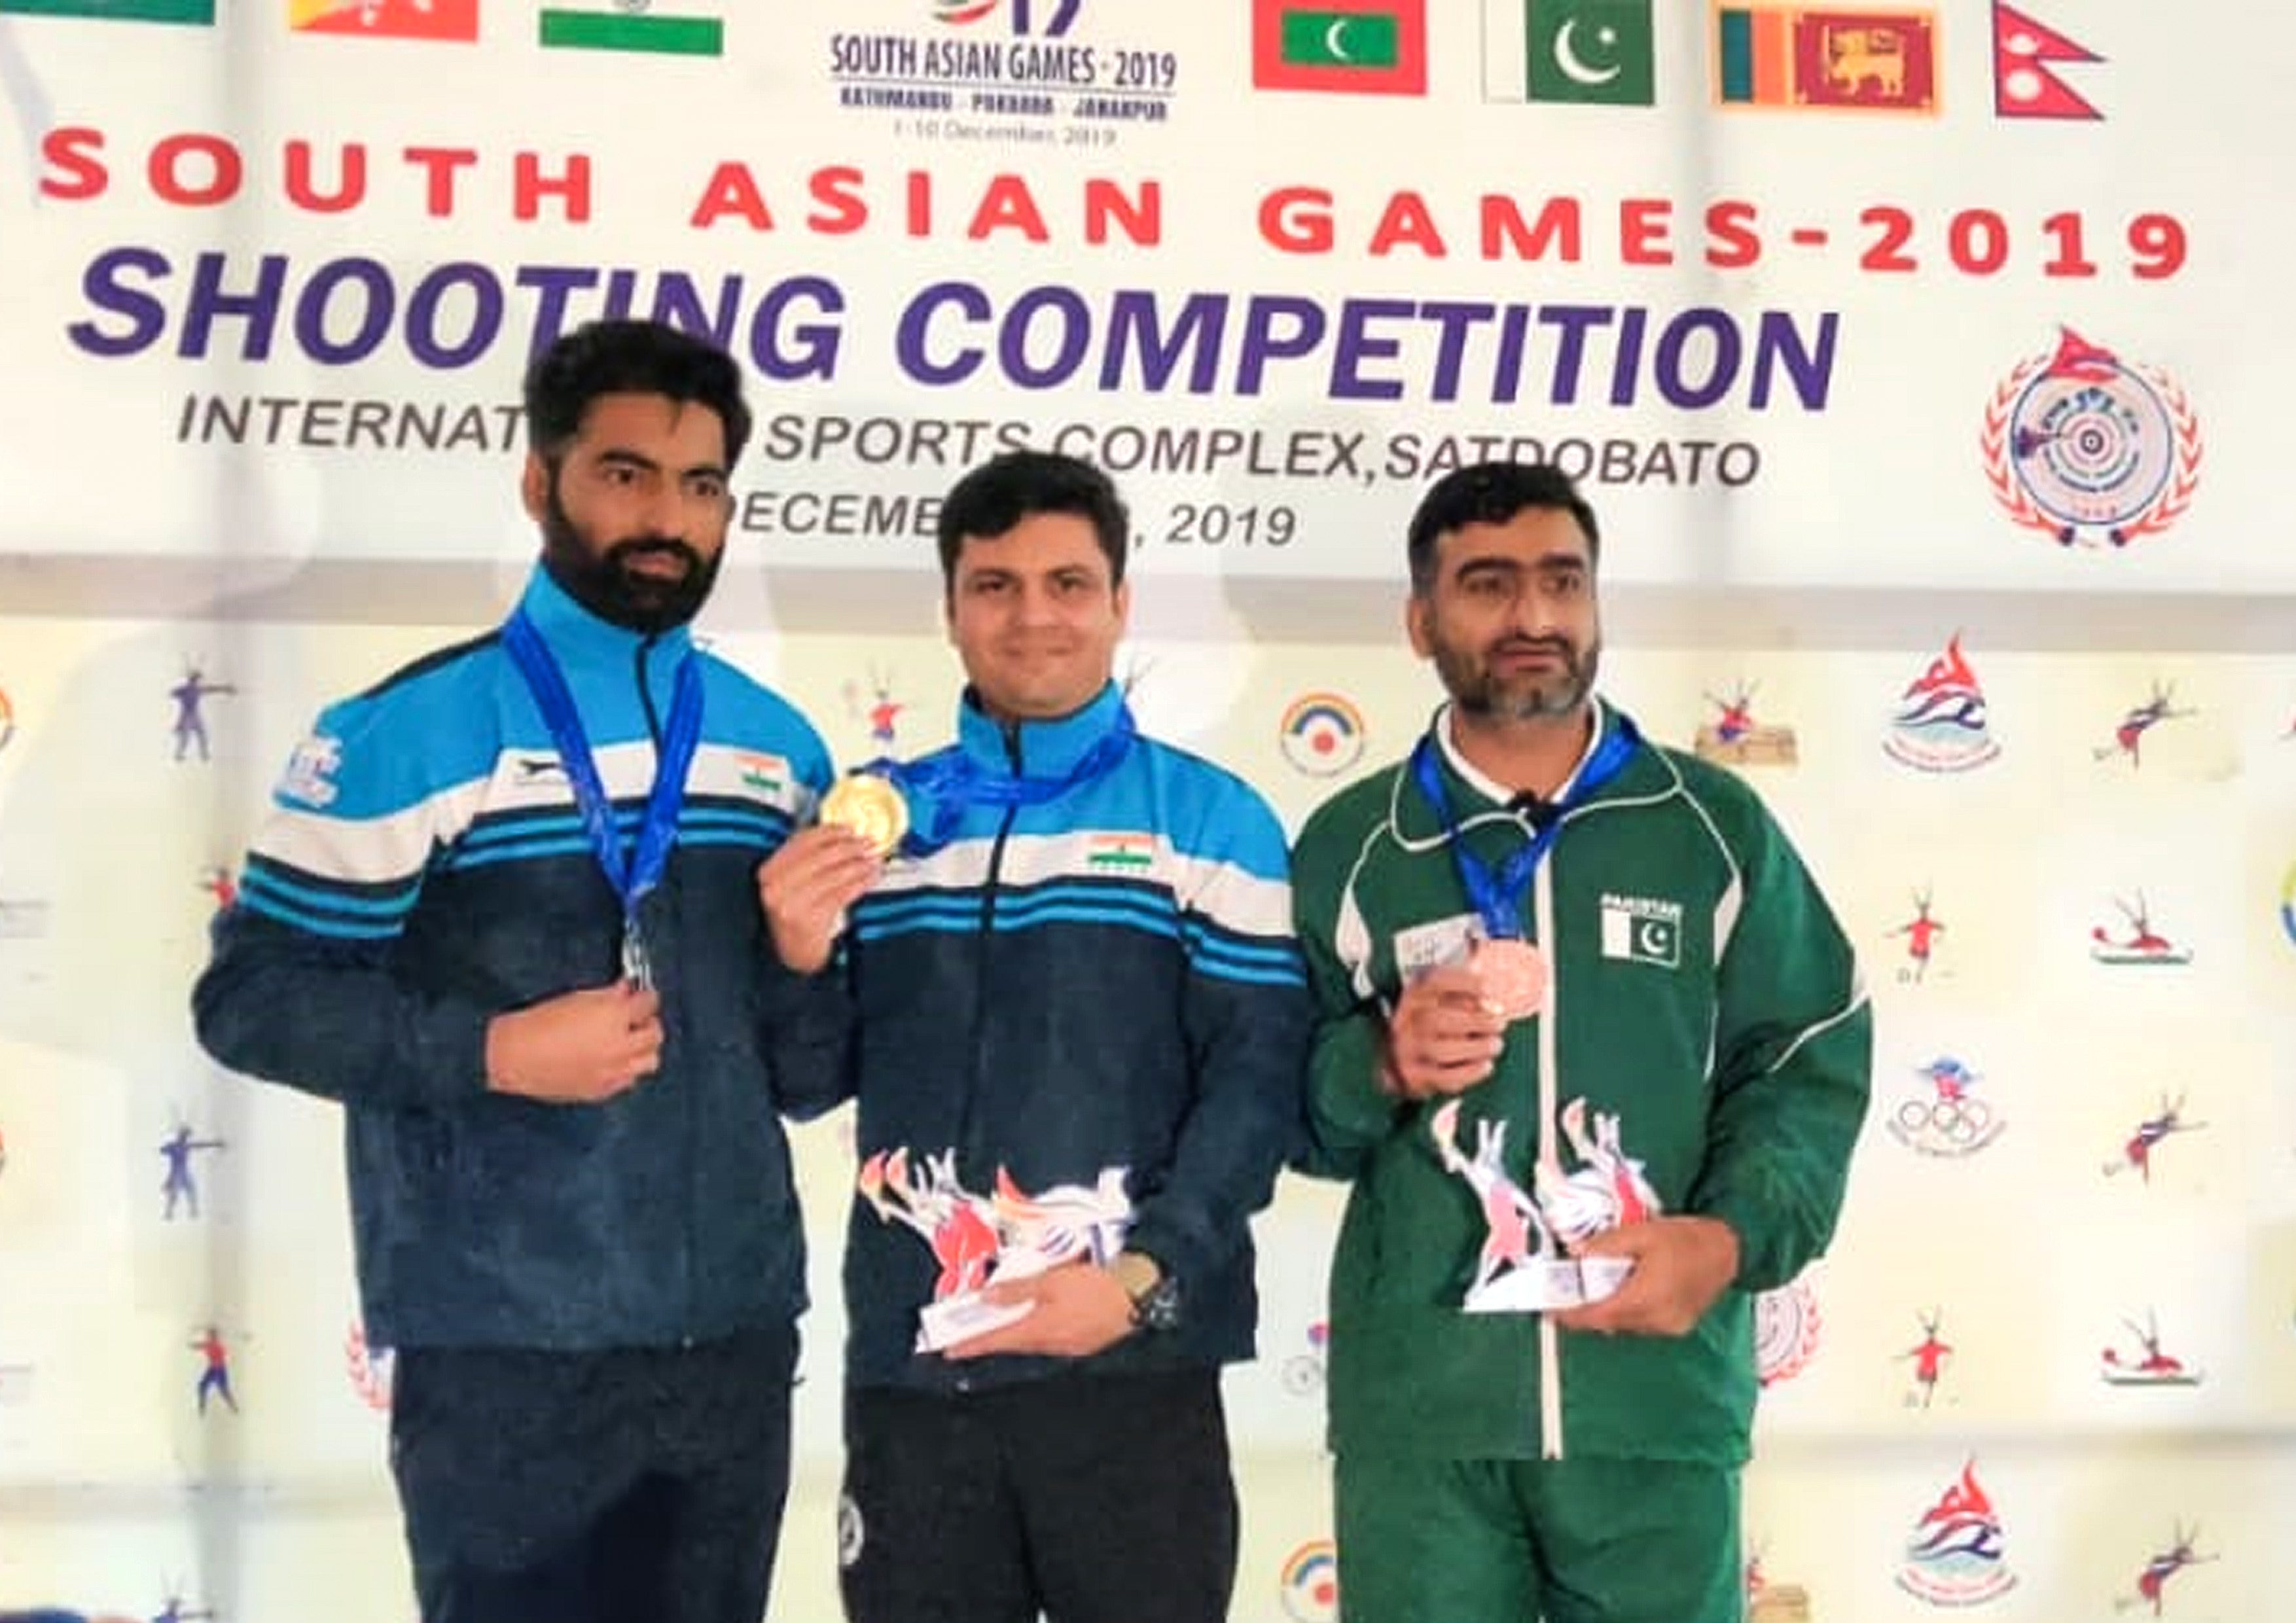 LPU second year student Gurpreet Singh looking jubilant on winning two medals for India at 13th South Asian Games in Nepal.